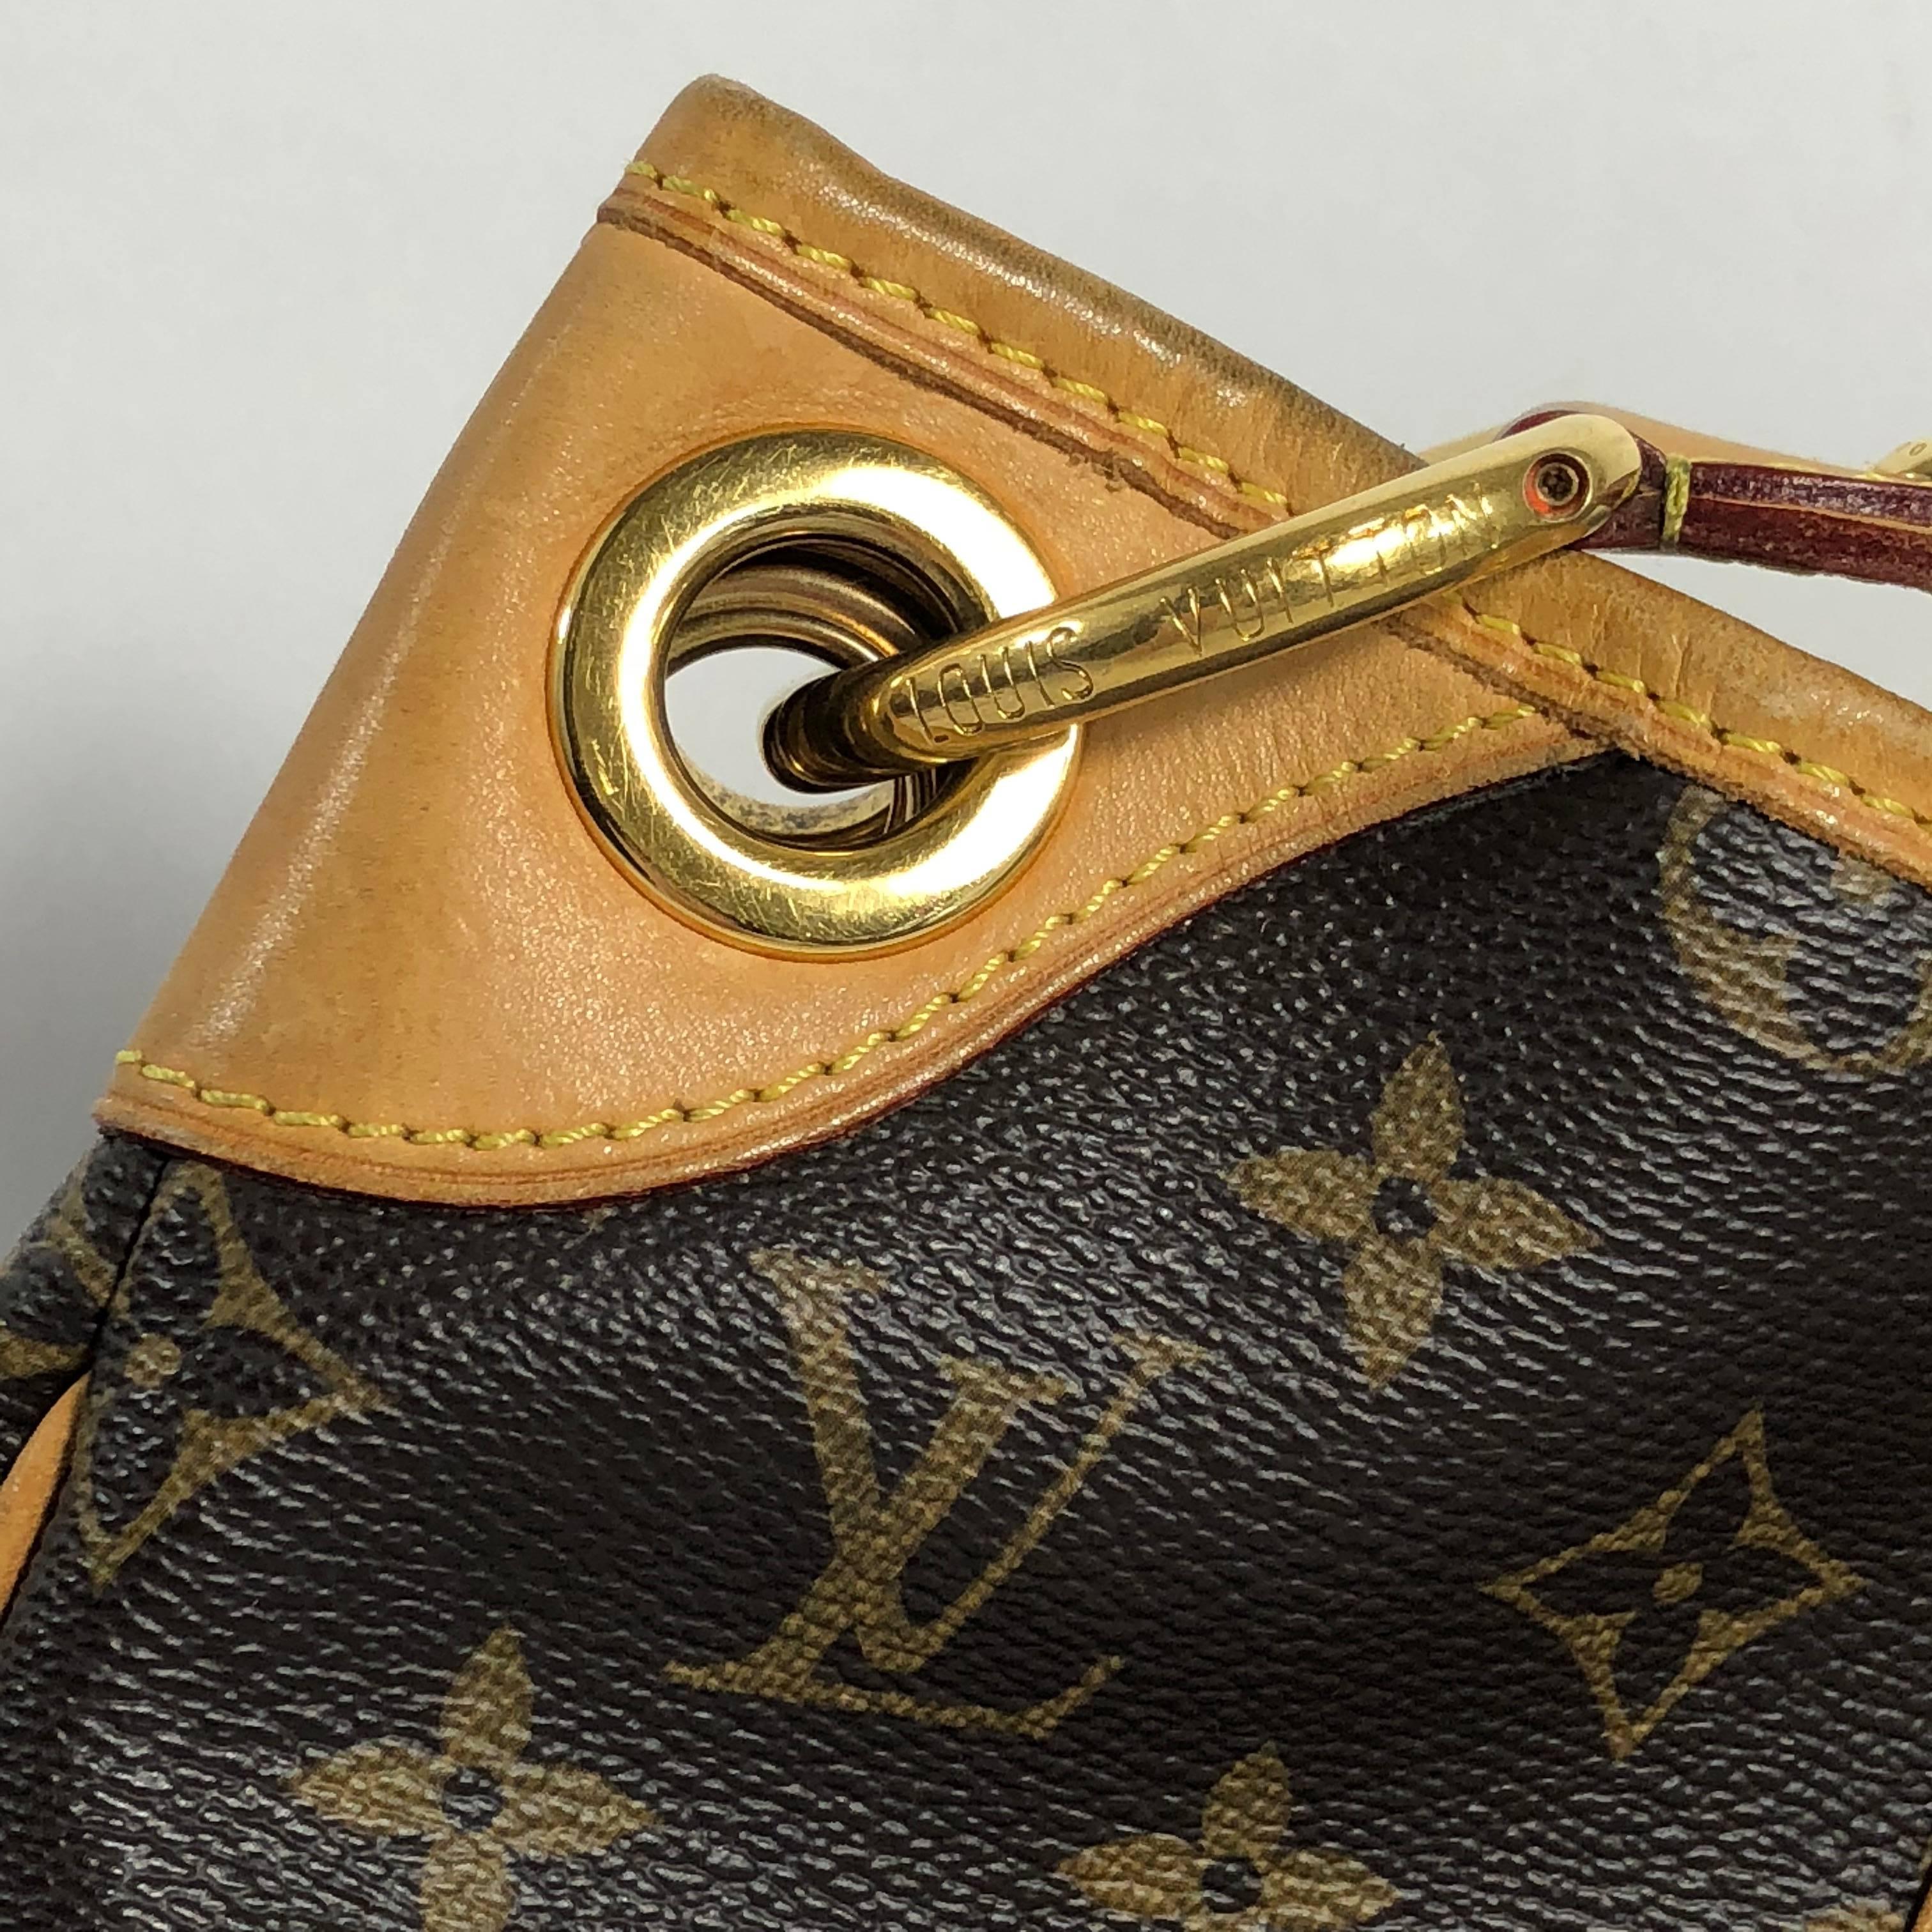 Louis Vuitton Monogram Galliera PM Hobo Bag In Good Condition For Sale In Saint Charles, IL